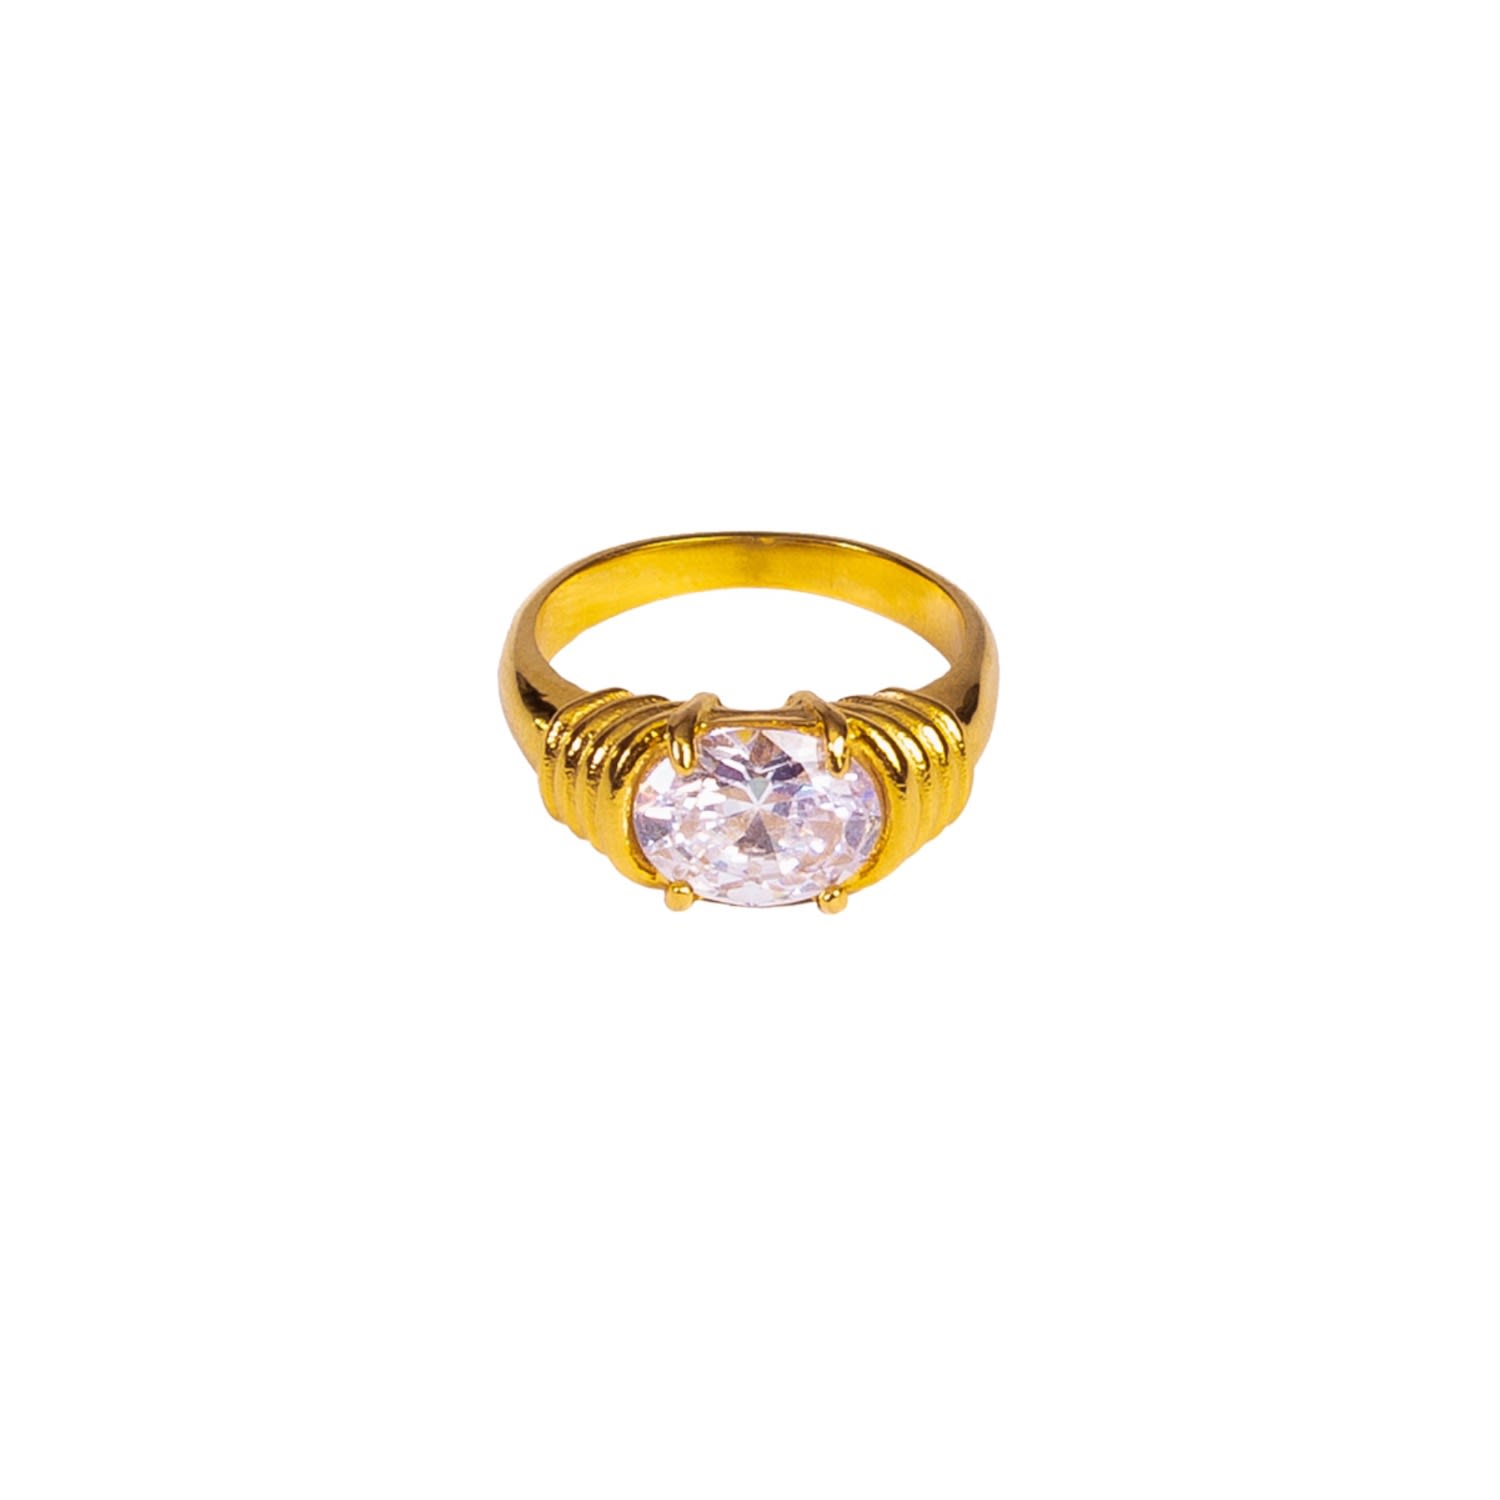 Tseatjewelry Ease Ring In Gold